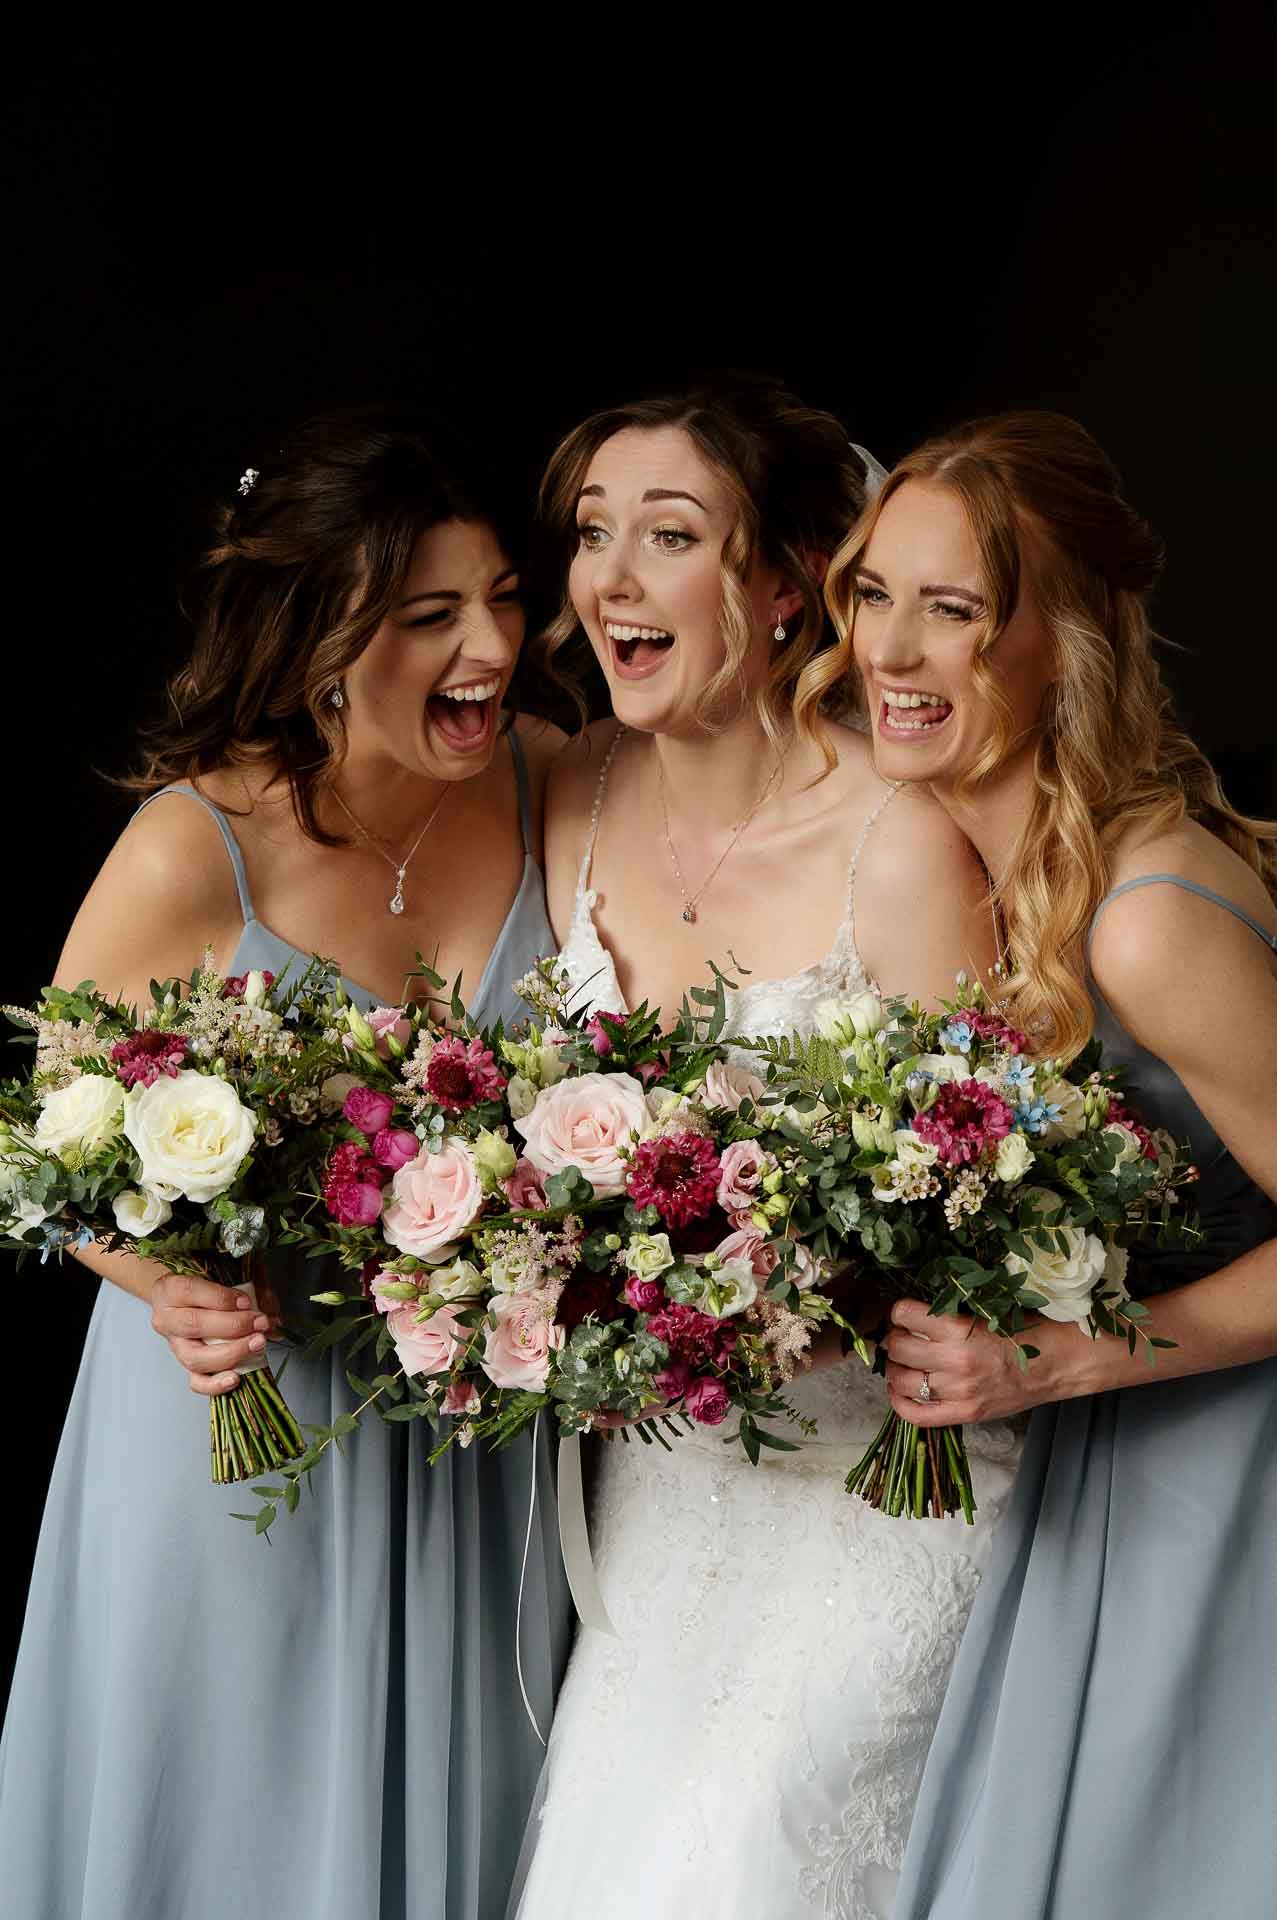 Sophie and her bridesmaids giggling holding their pink flower bouquets before the ceremony at Swynford Manor. Photography by Fountain Photography. Videography by Veiled Productions.